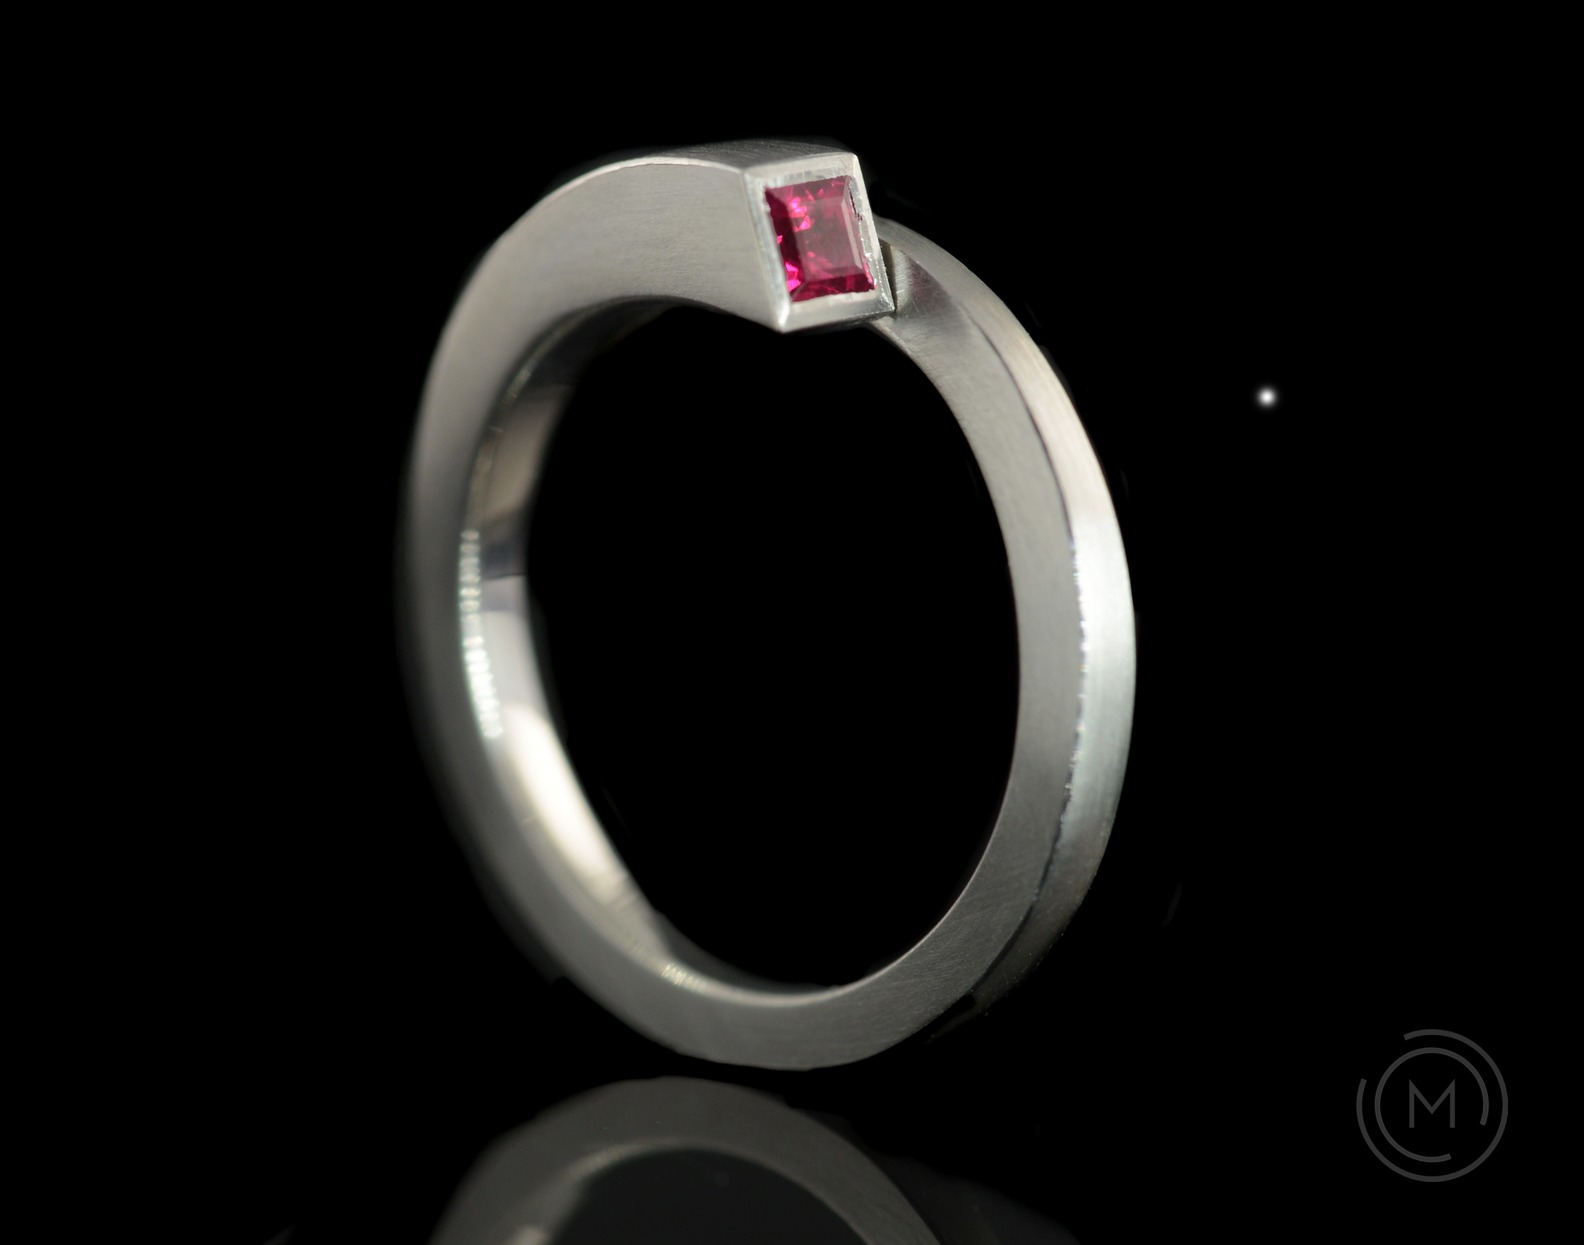 Unusual architectural minimal engagement ring in platinum with princess cut ruby